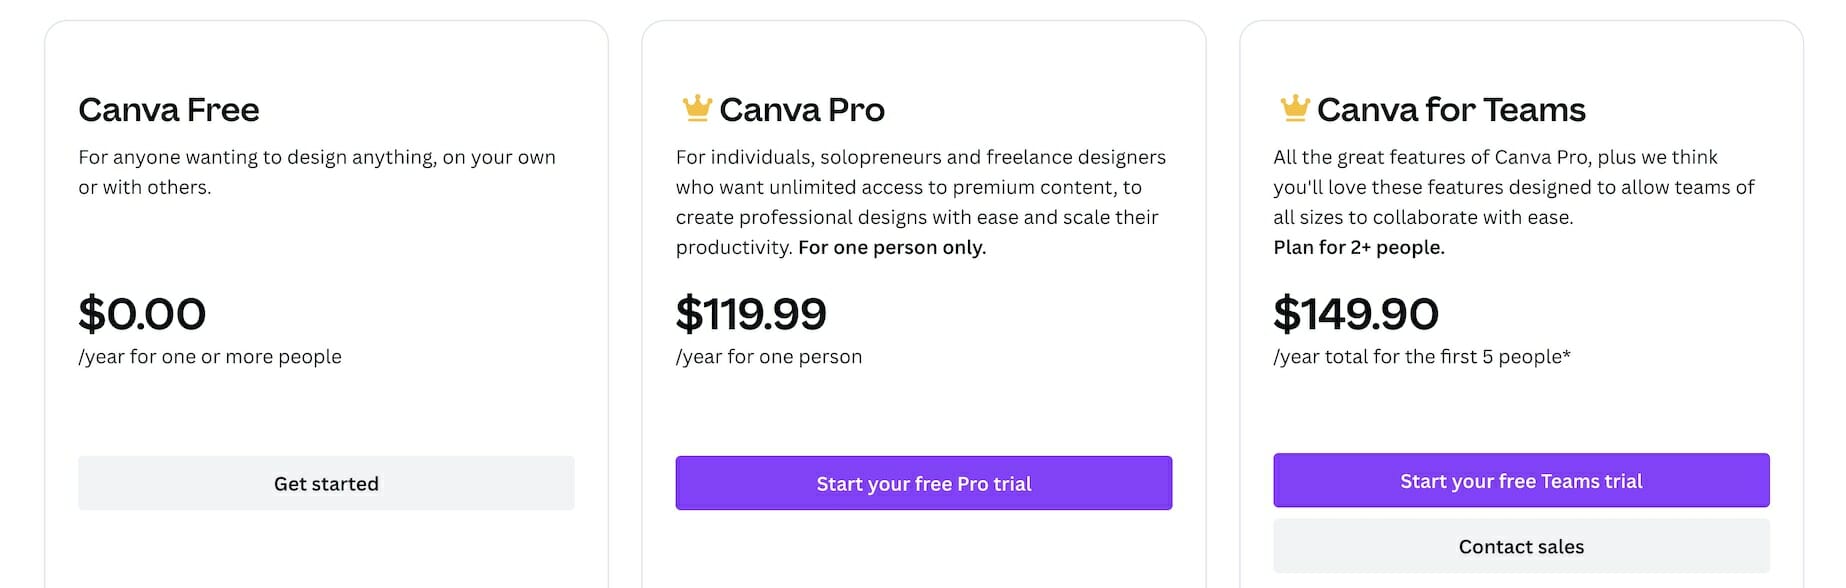 Canva pricing plans